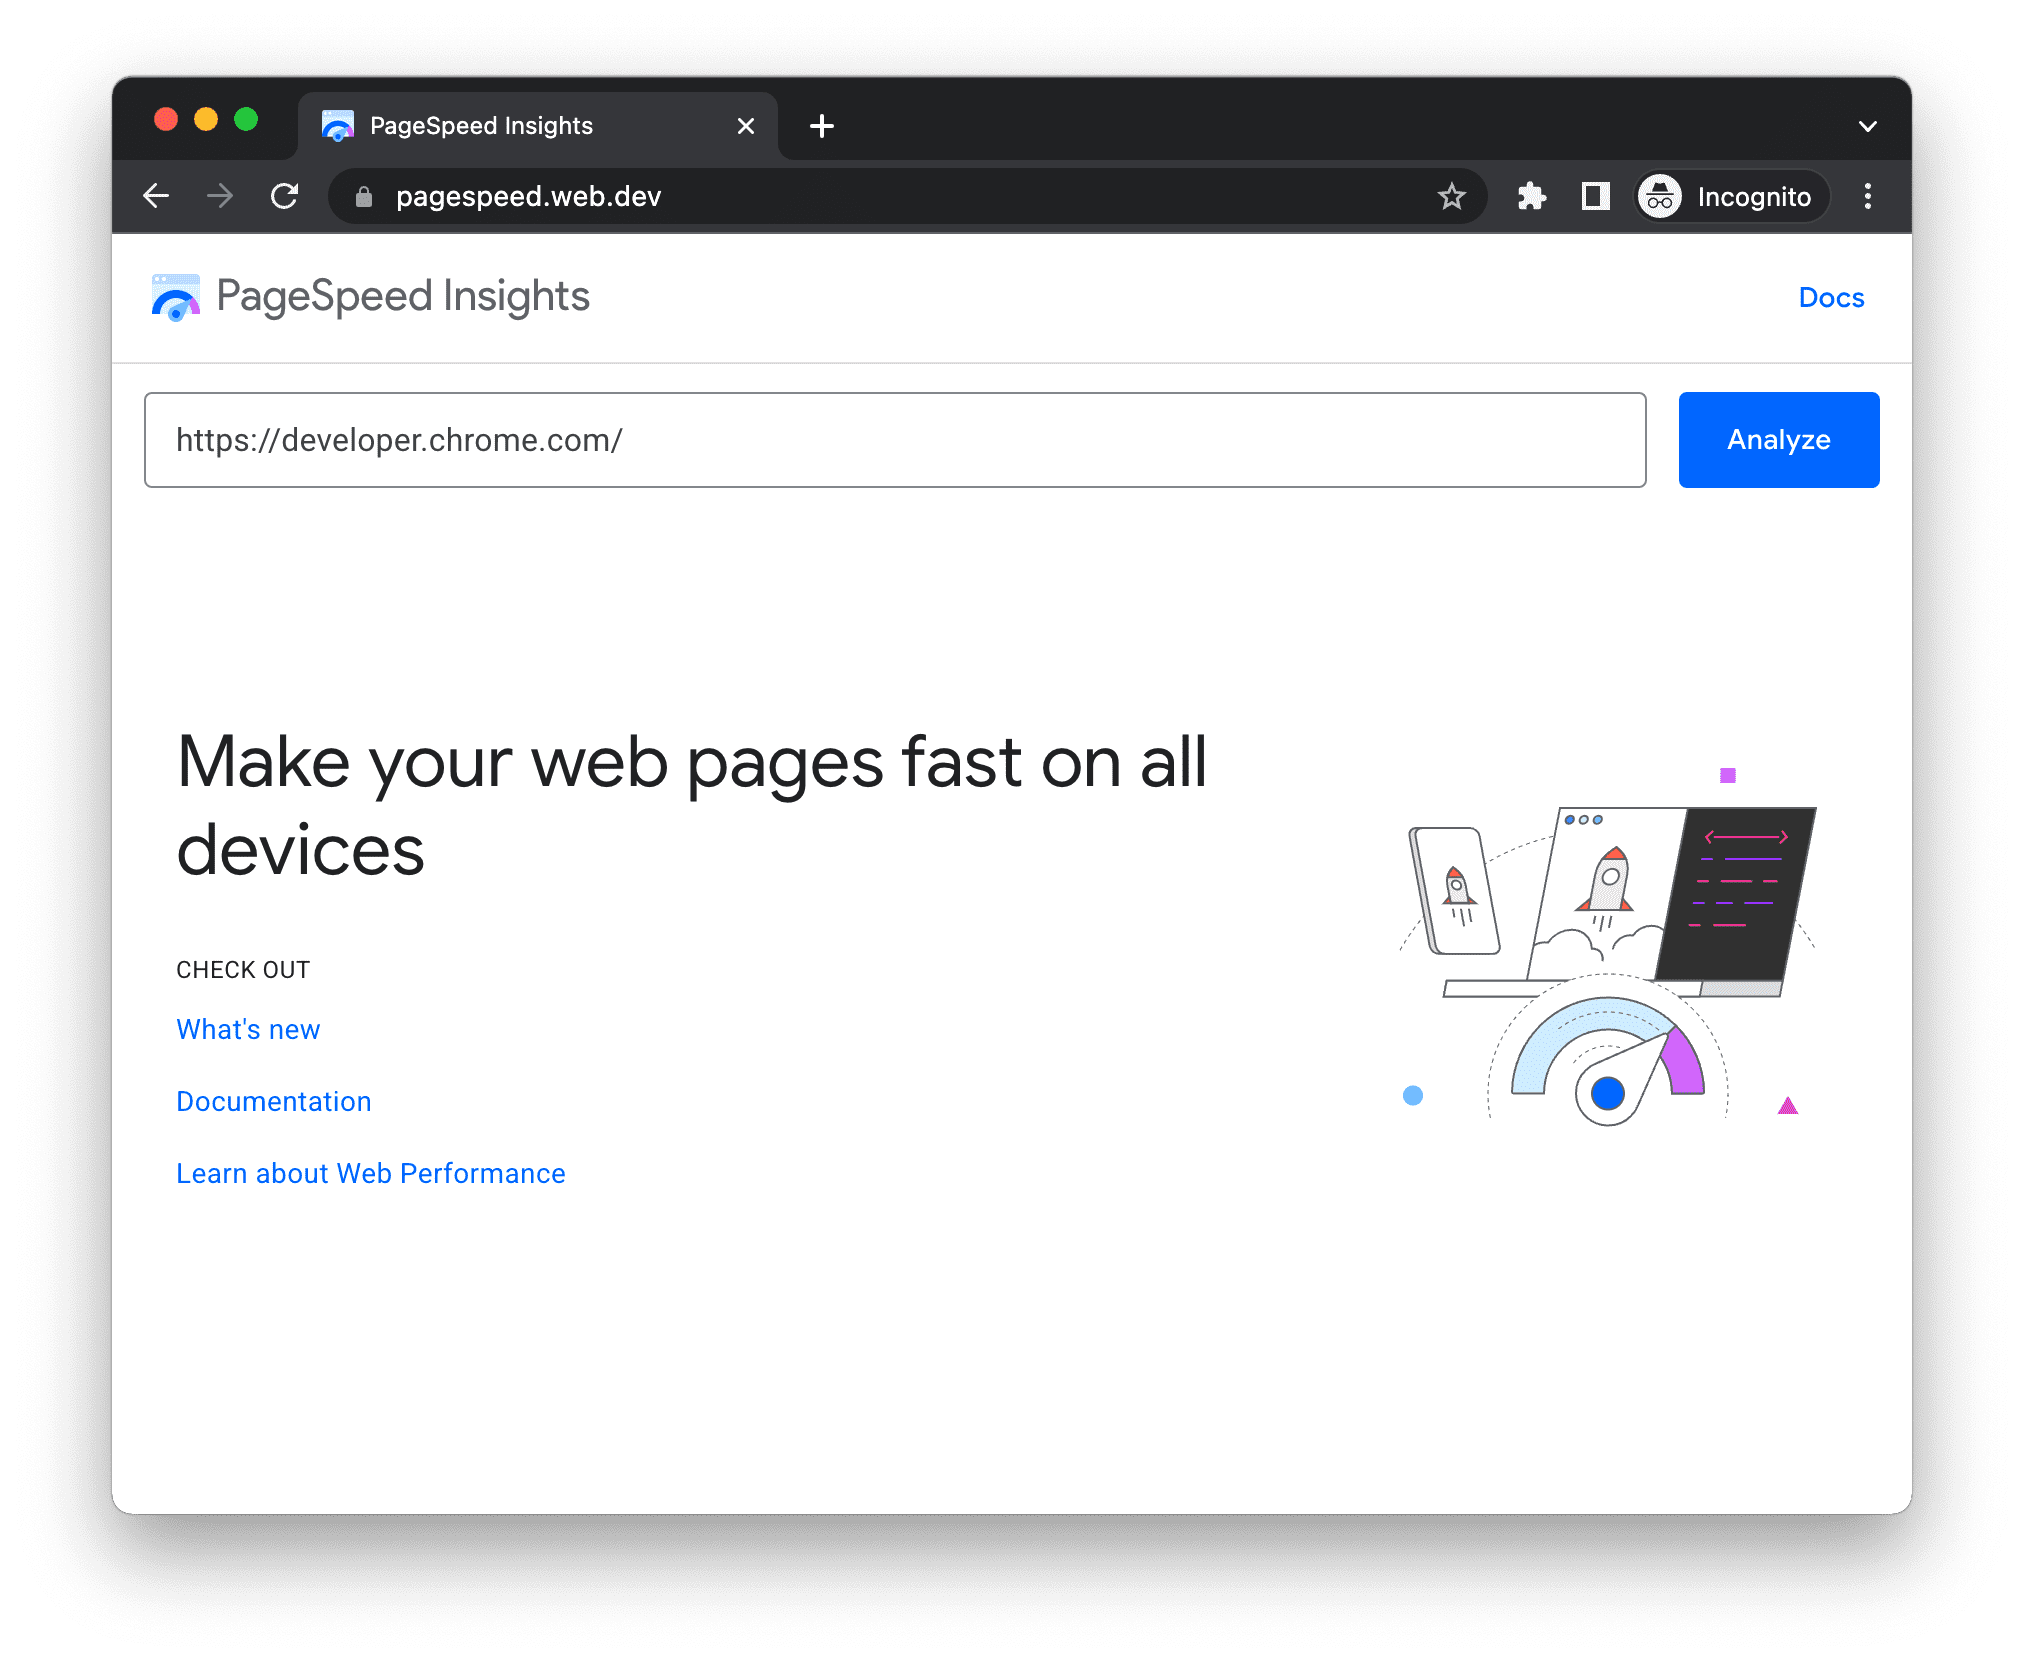 The PageSpeed Insights UI